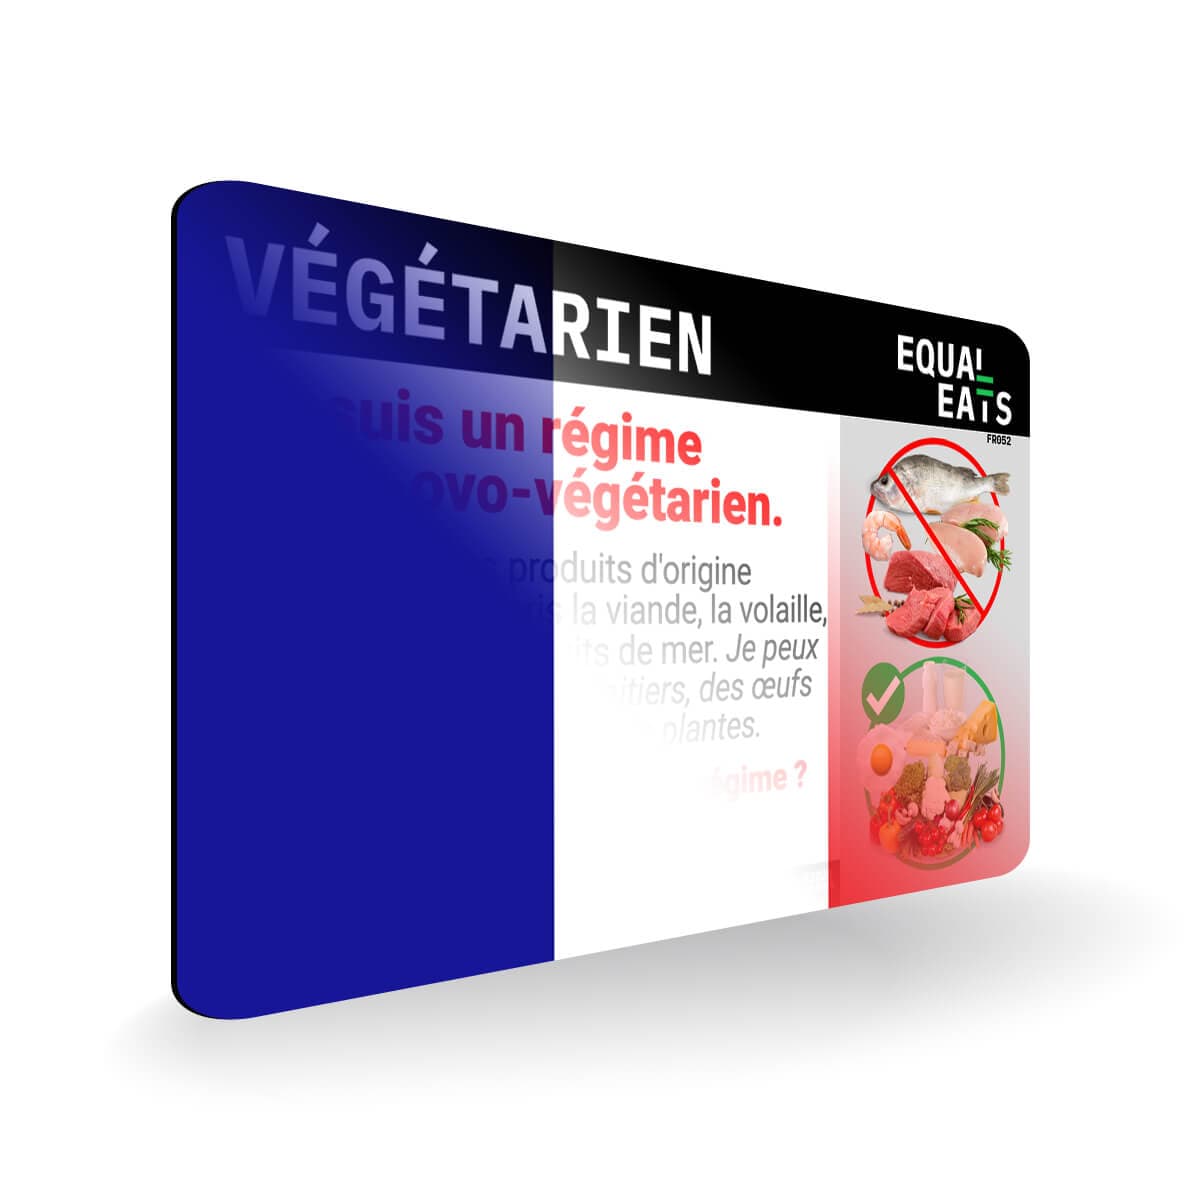 Lacto Ovo Vegetarian Diet in French. Vegetarian Card for France